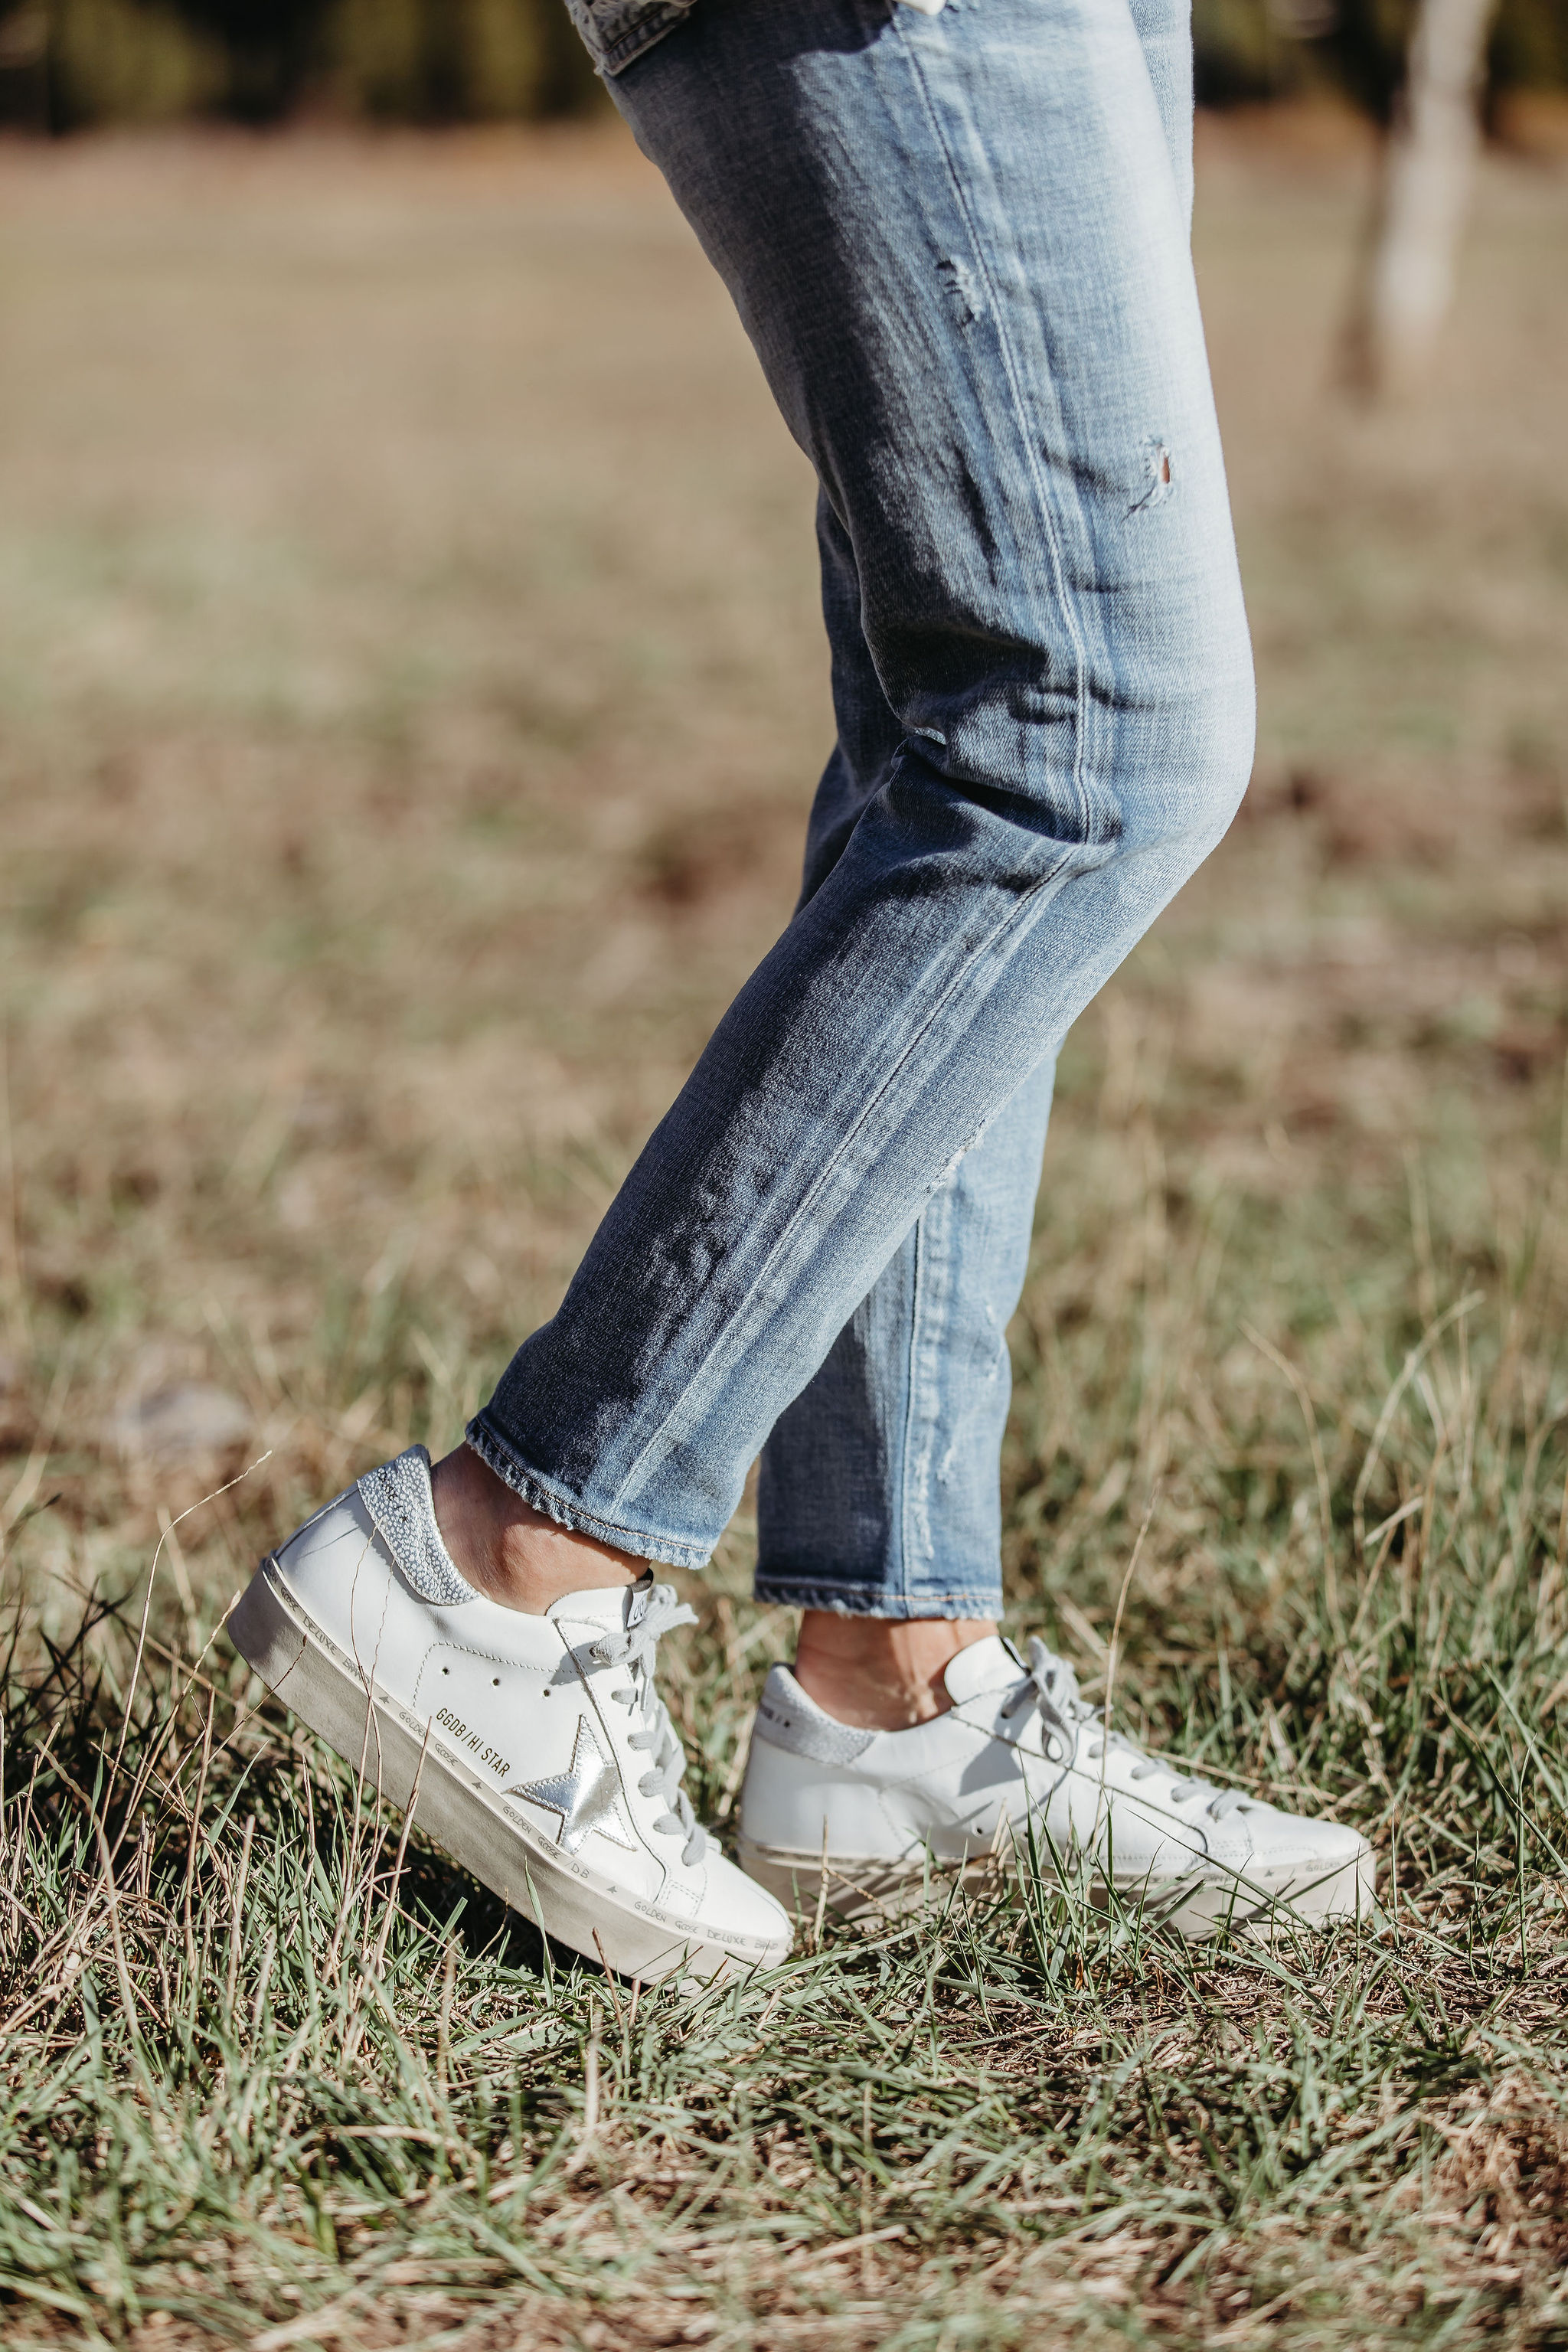 Lightweight Shirts For Summer, Fashion blogger Erin Busbee of BusbeeStyle.com wearing Moussy Vintage tapered jeans and Golden Goose platform sneakers from Nordstrom in Telluride, Colorado